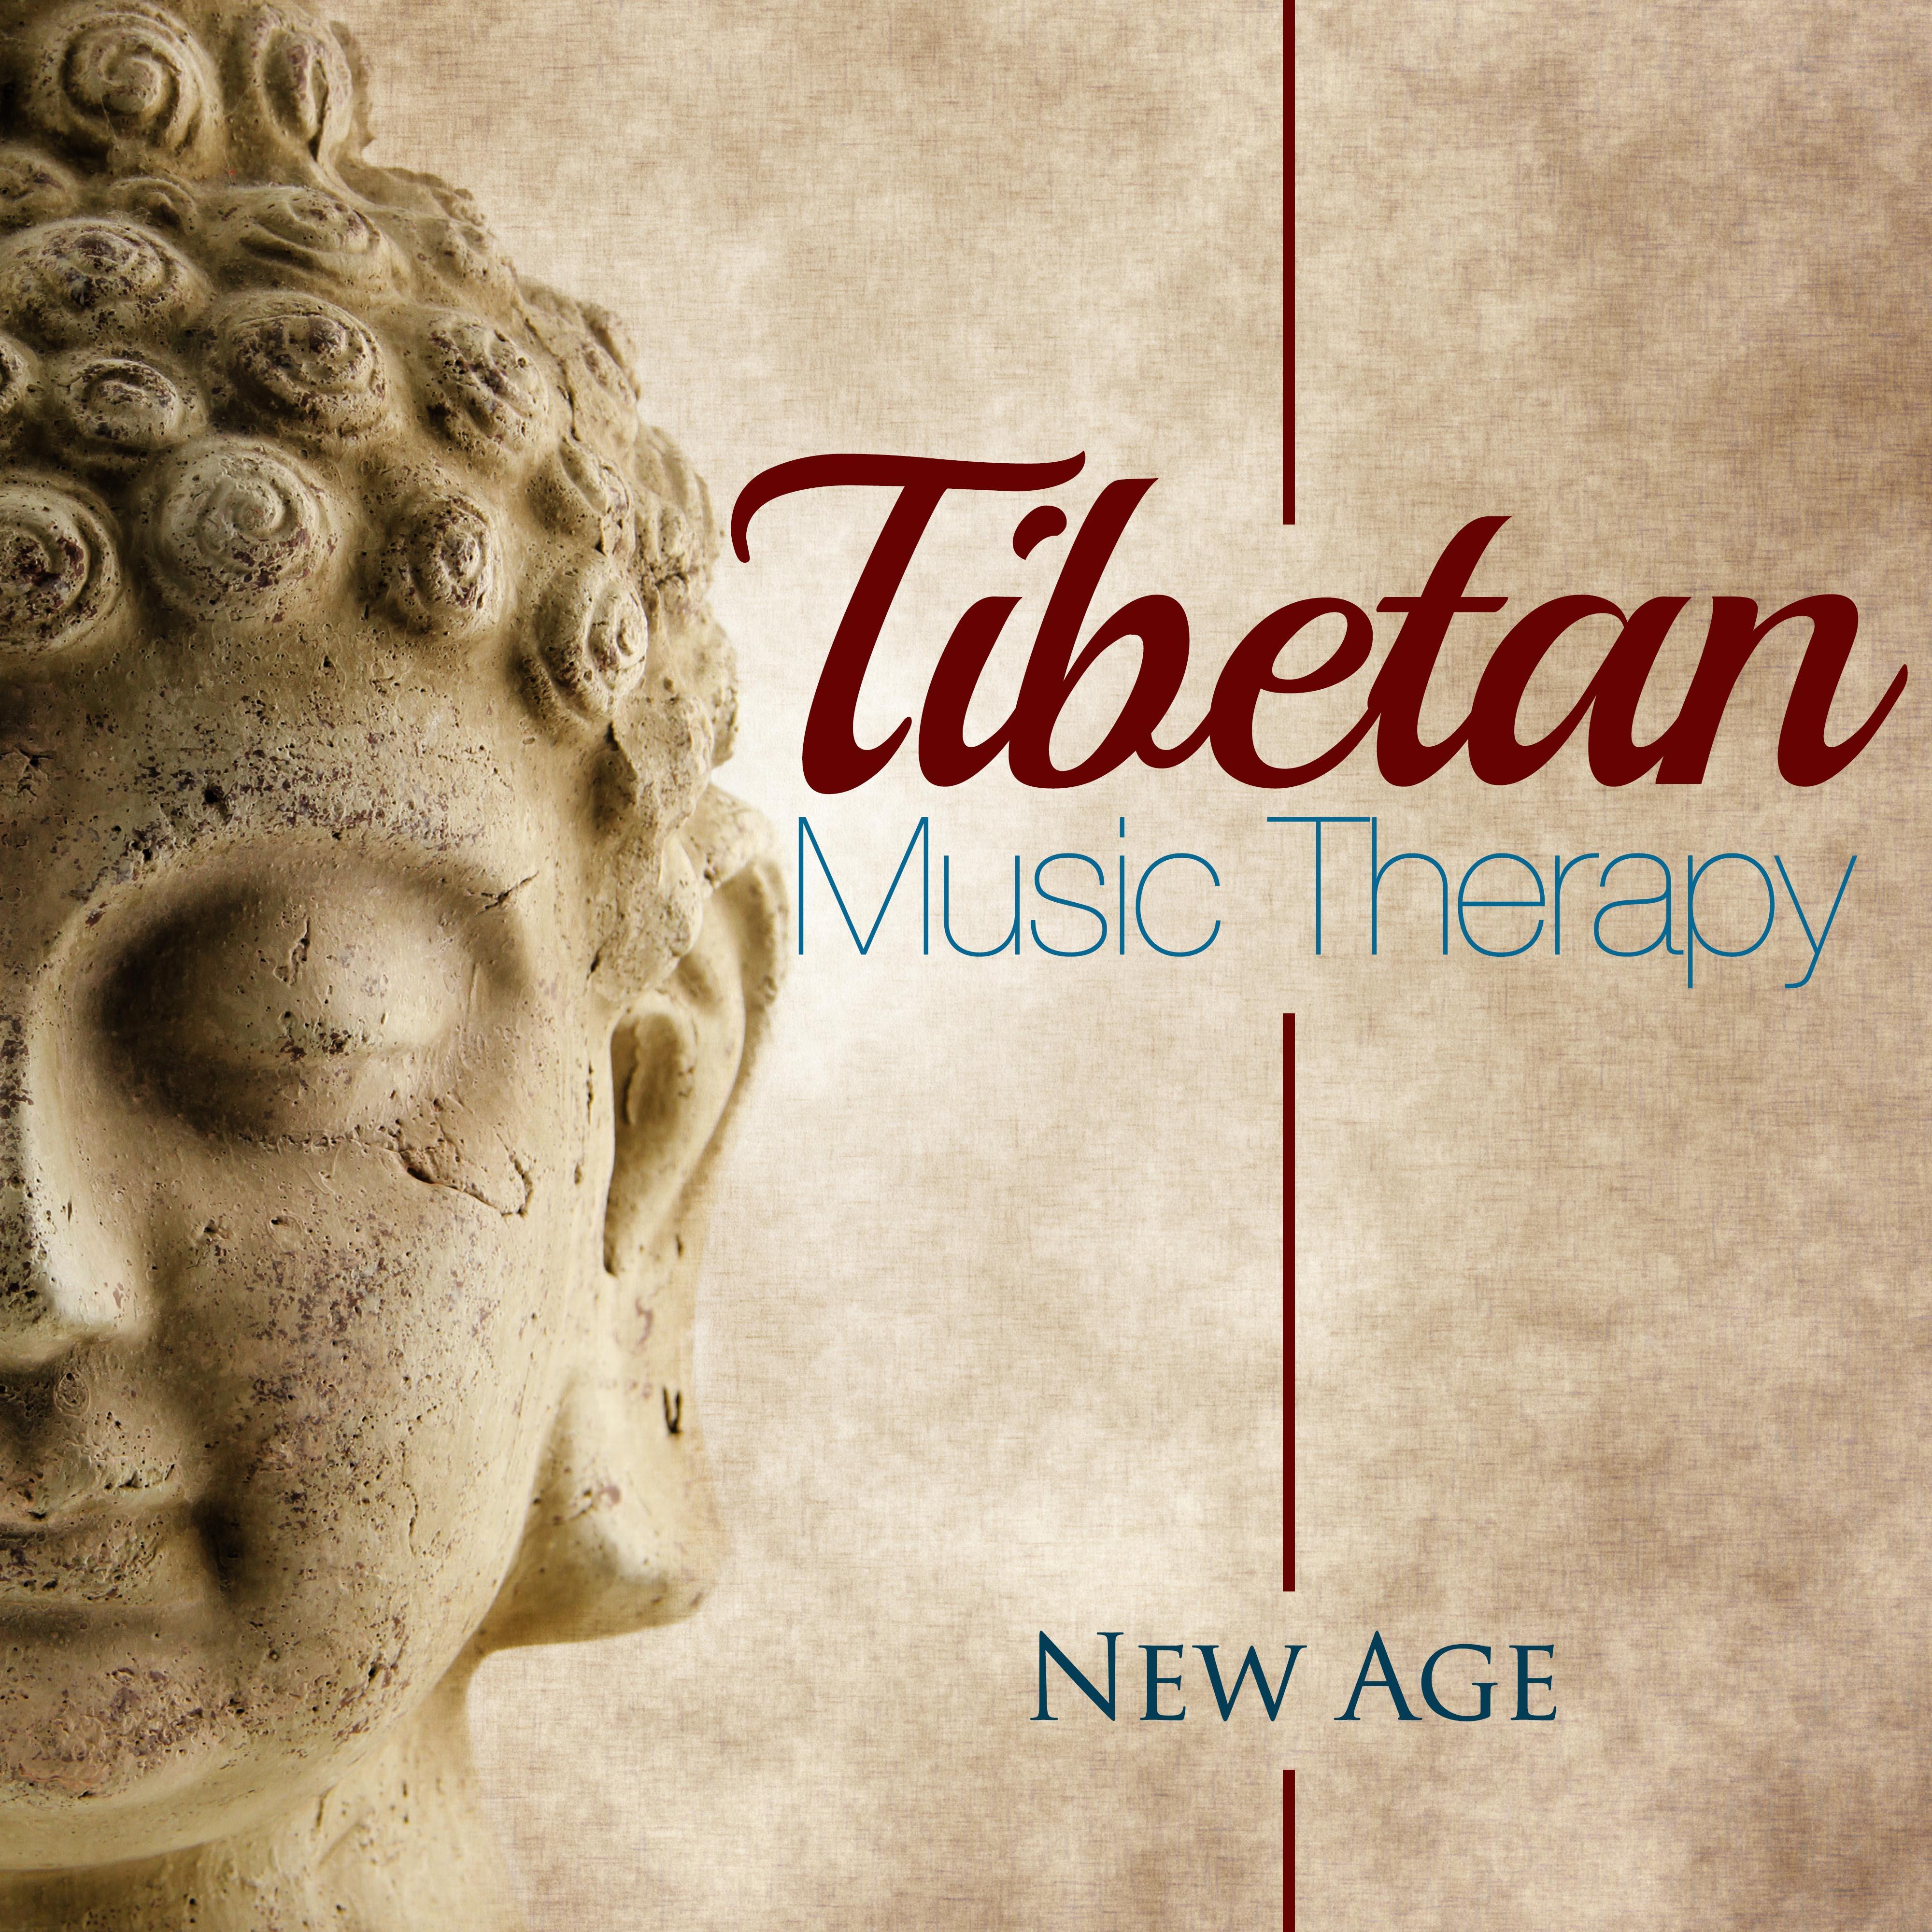 Tibetan Music Therapy - Tibetan Meditation Music, Lama Meditation Oriental Music Background, Tibetan Song and Sounds of Nature, Relaxing Buddhist Meditation Music with Lullabies and Relaxing Cradle Songs